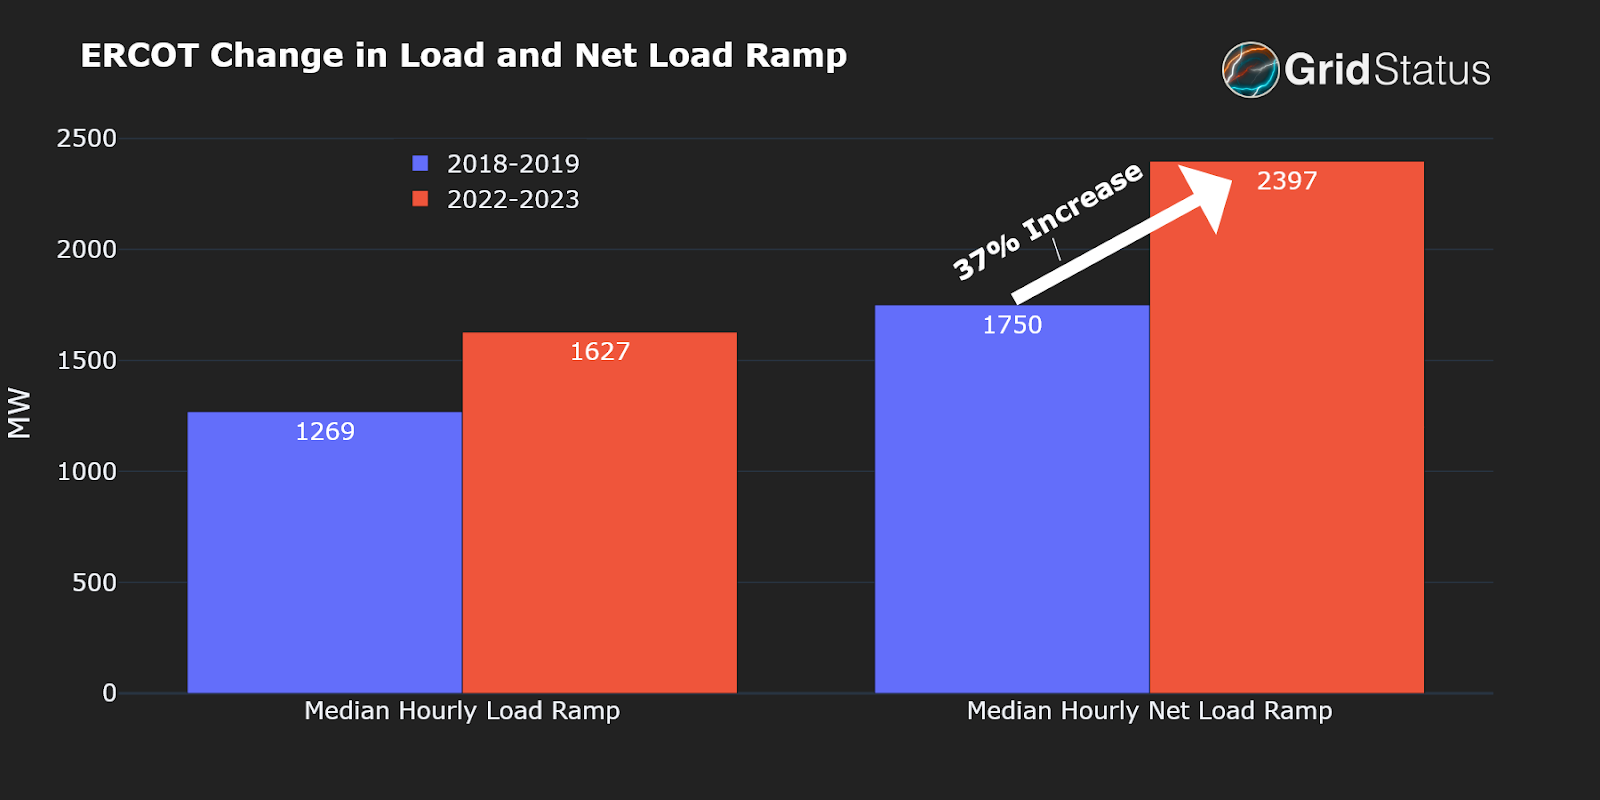 Net Load Ramps: How Texas and California Incorporate Renewables